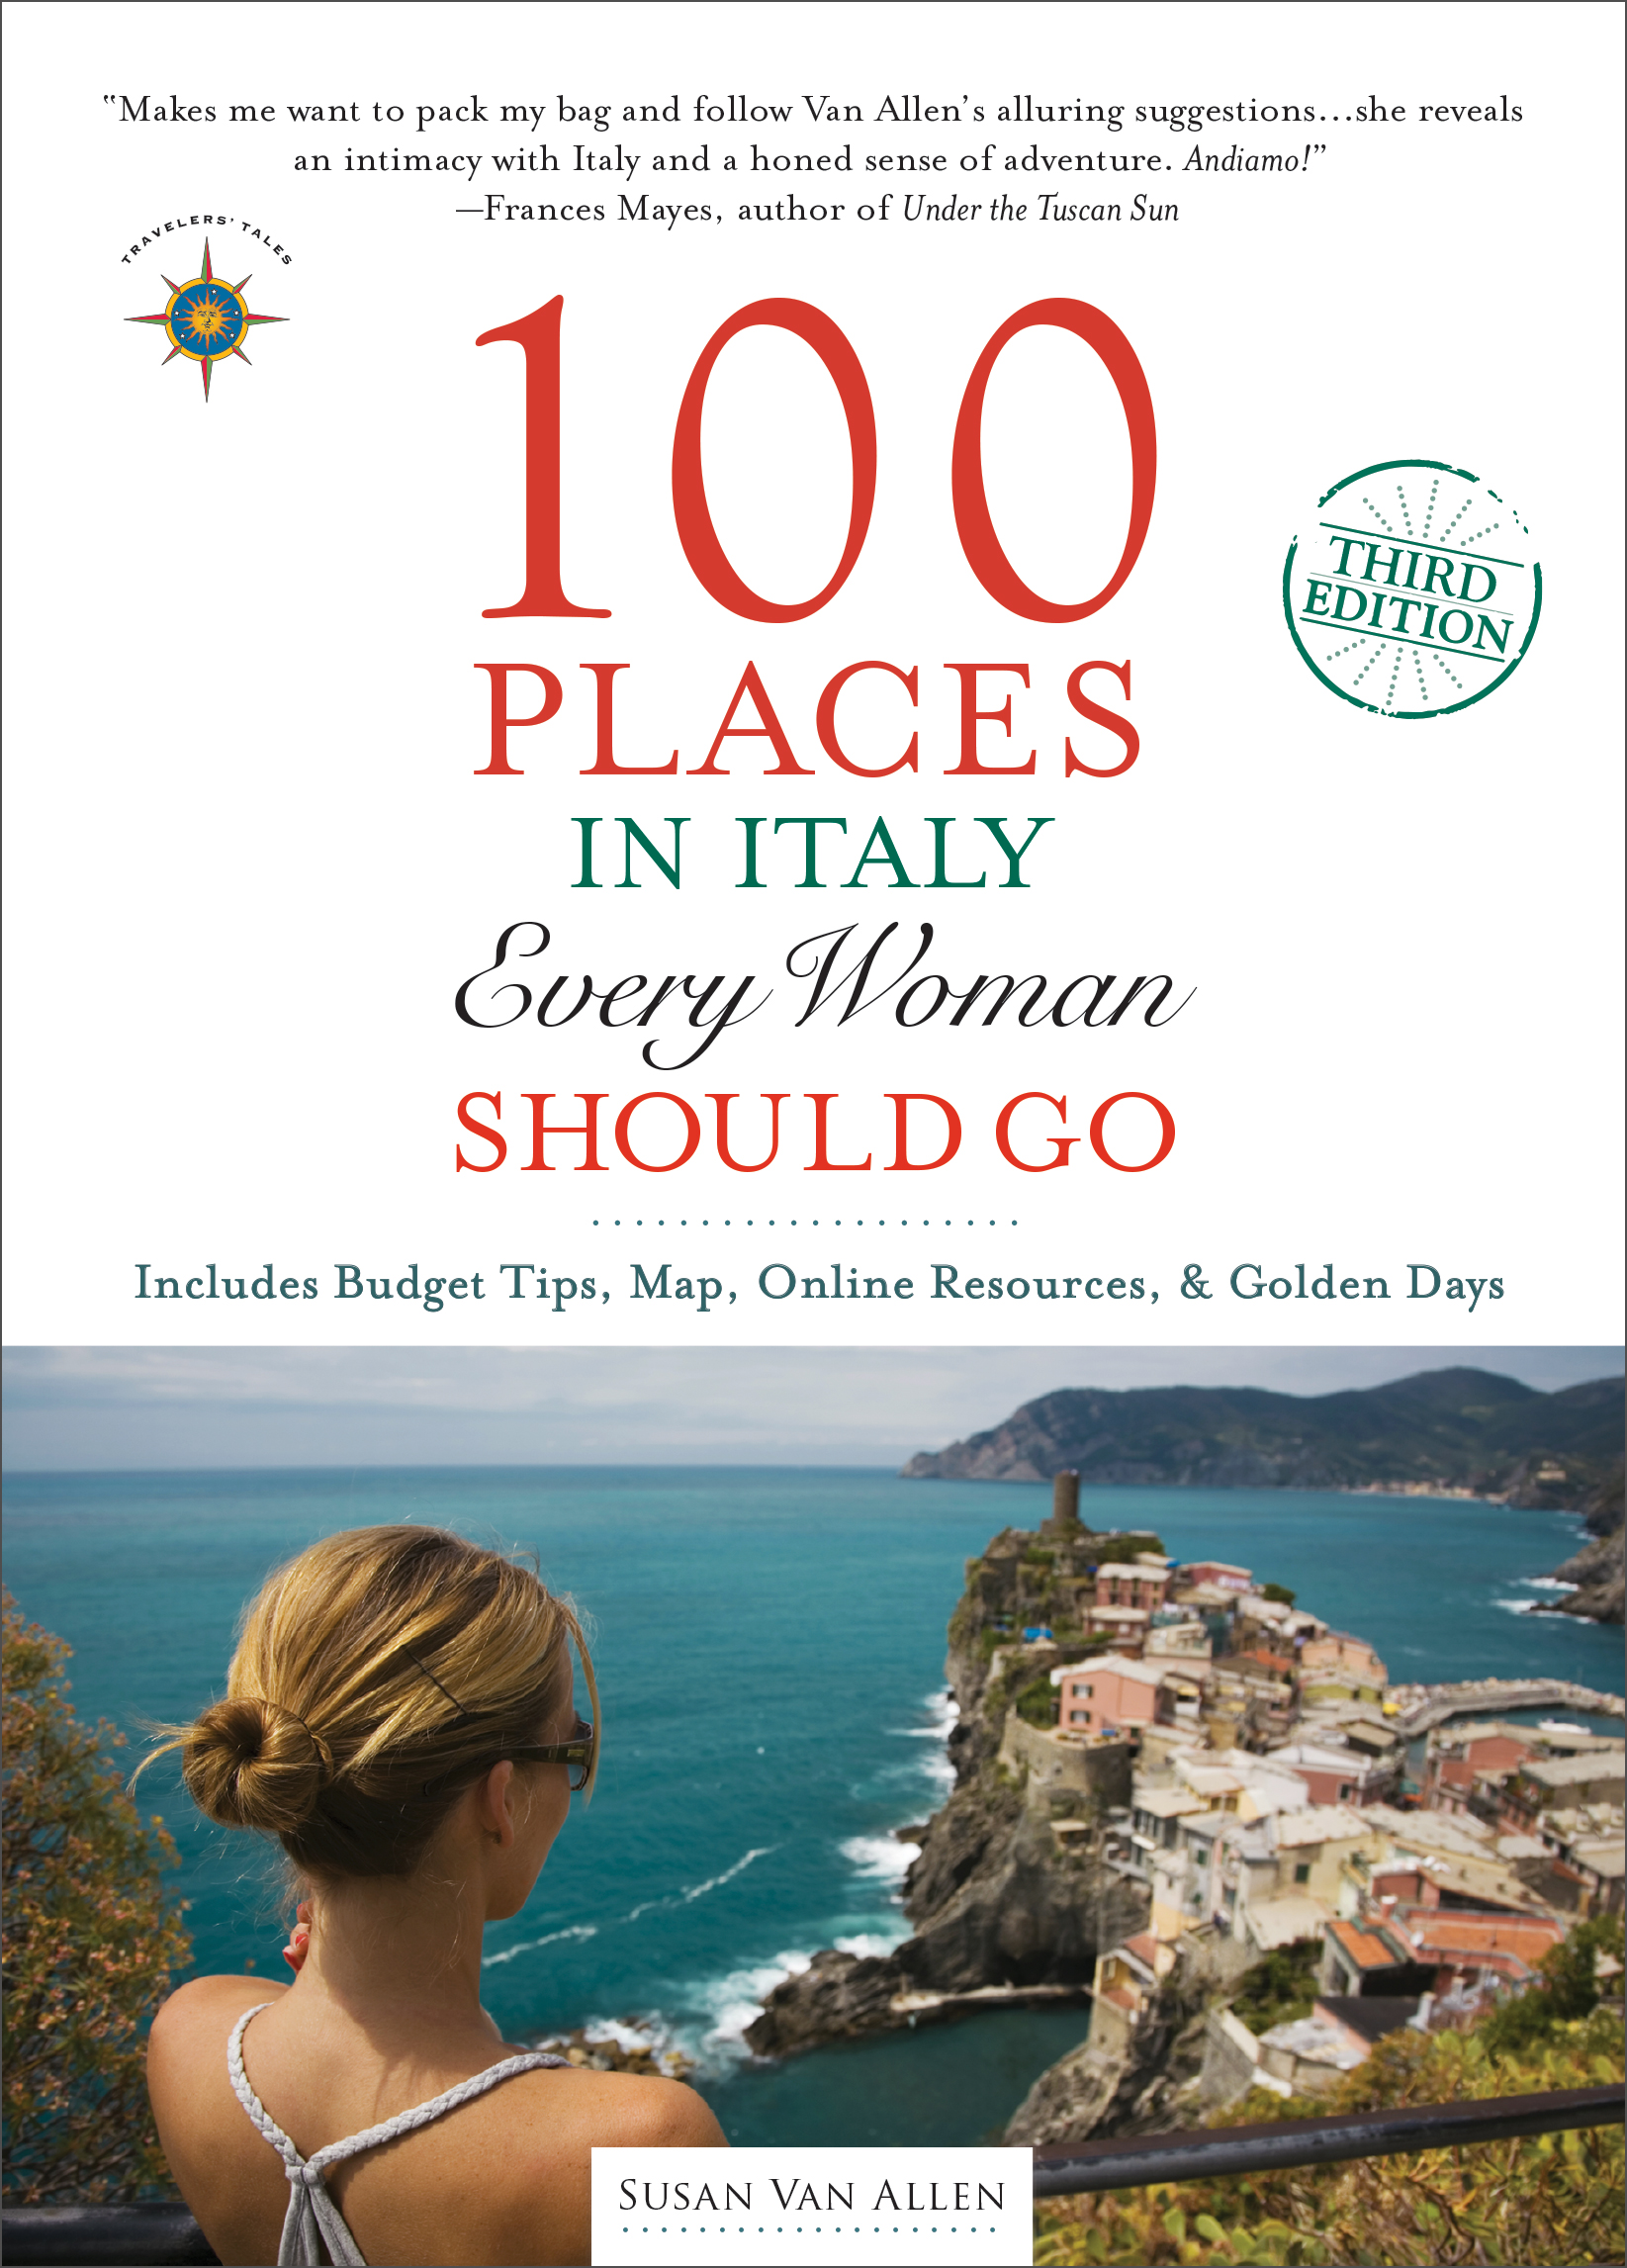 100 places in italy every woman should go